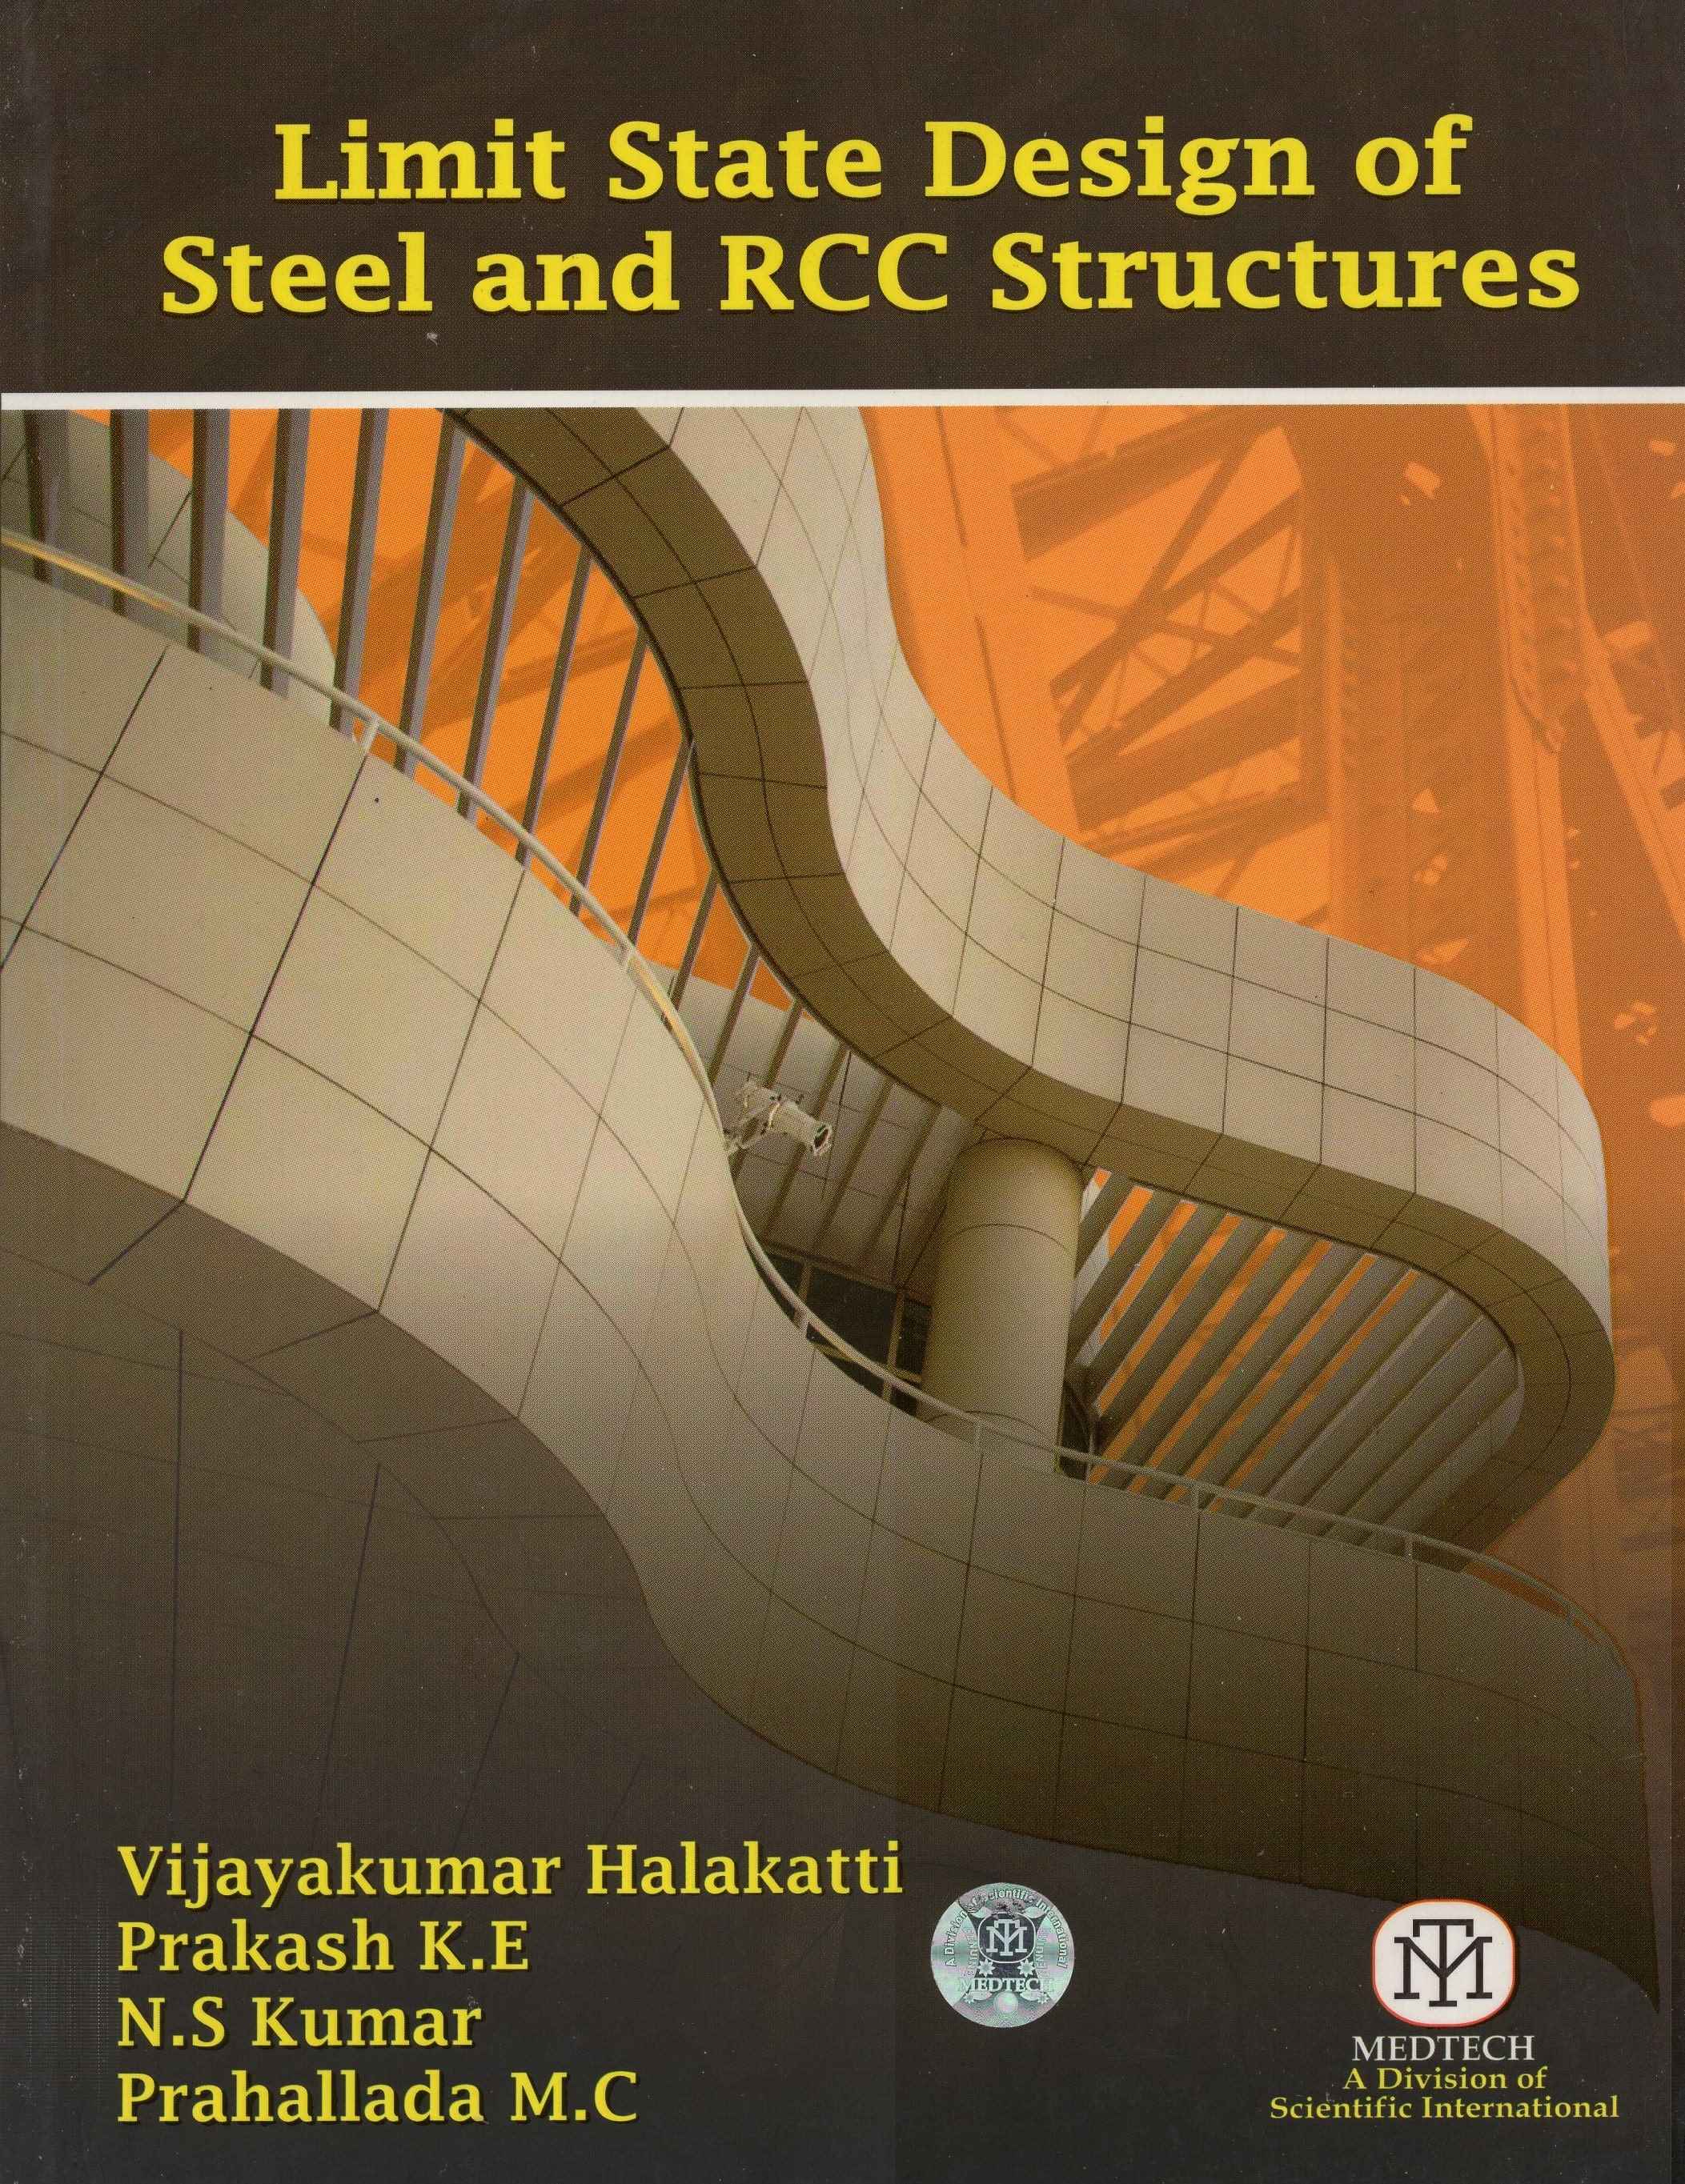 LIMIT STATE DESIGN OF STEEL AND RCC STRUCTURES